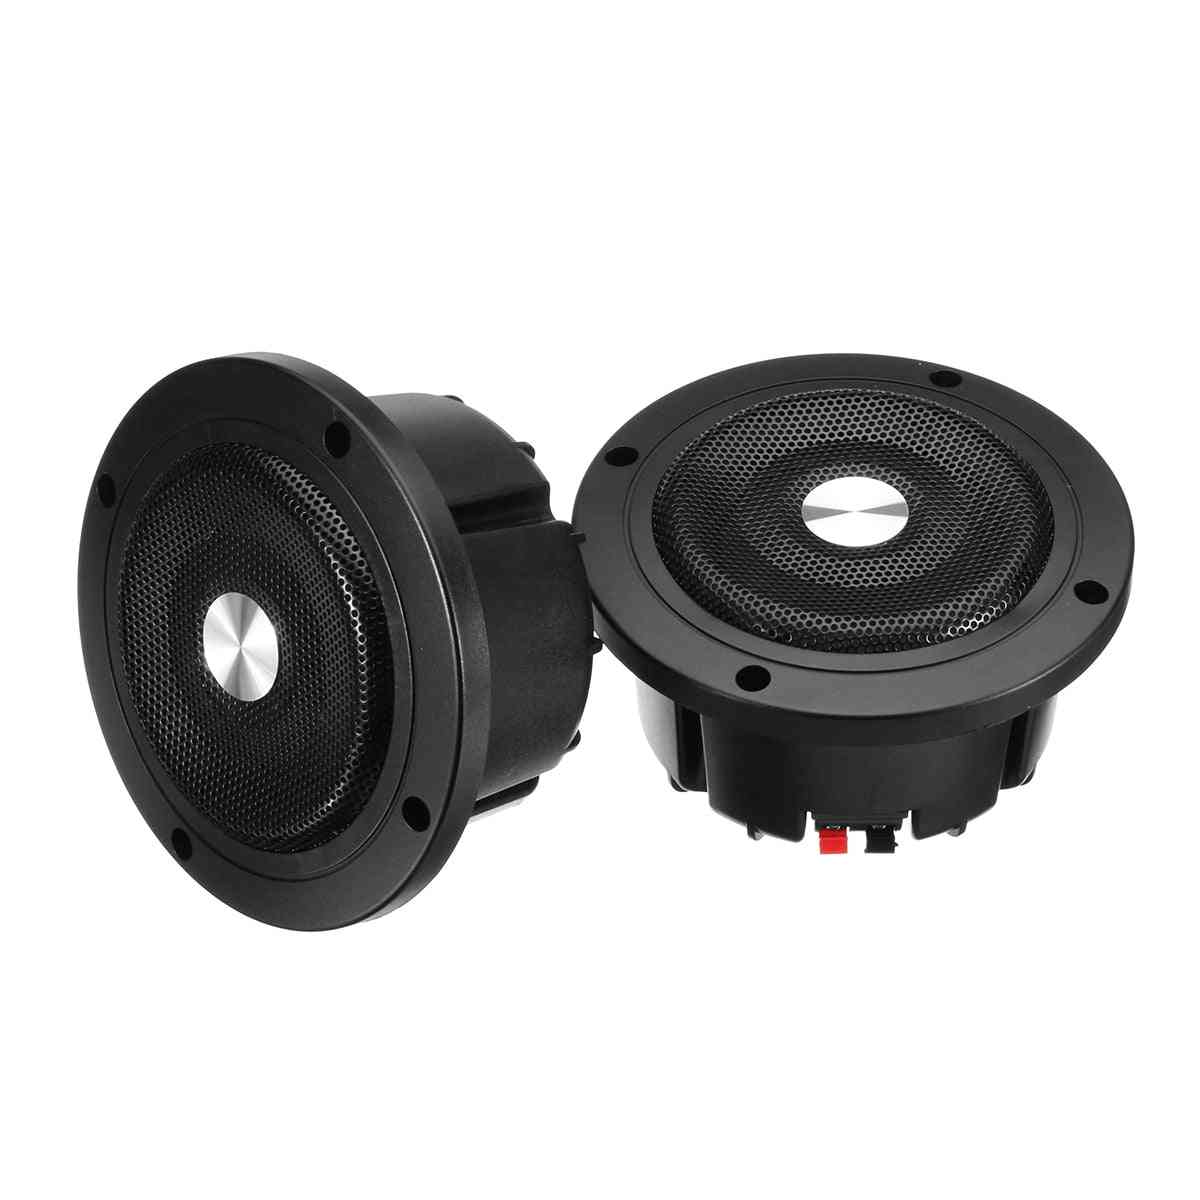 Round Ceiling In-wall Home Audio Speakers System - Flush Mount Speaker With Amplifier